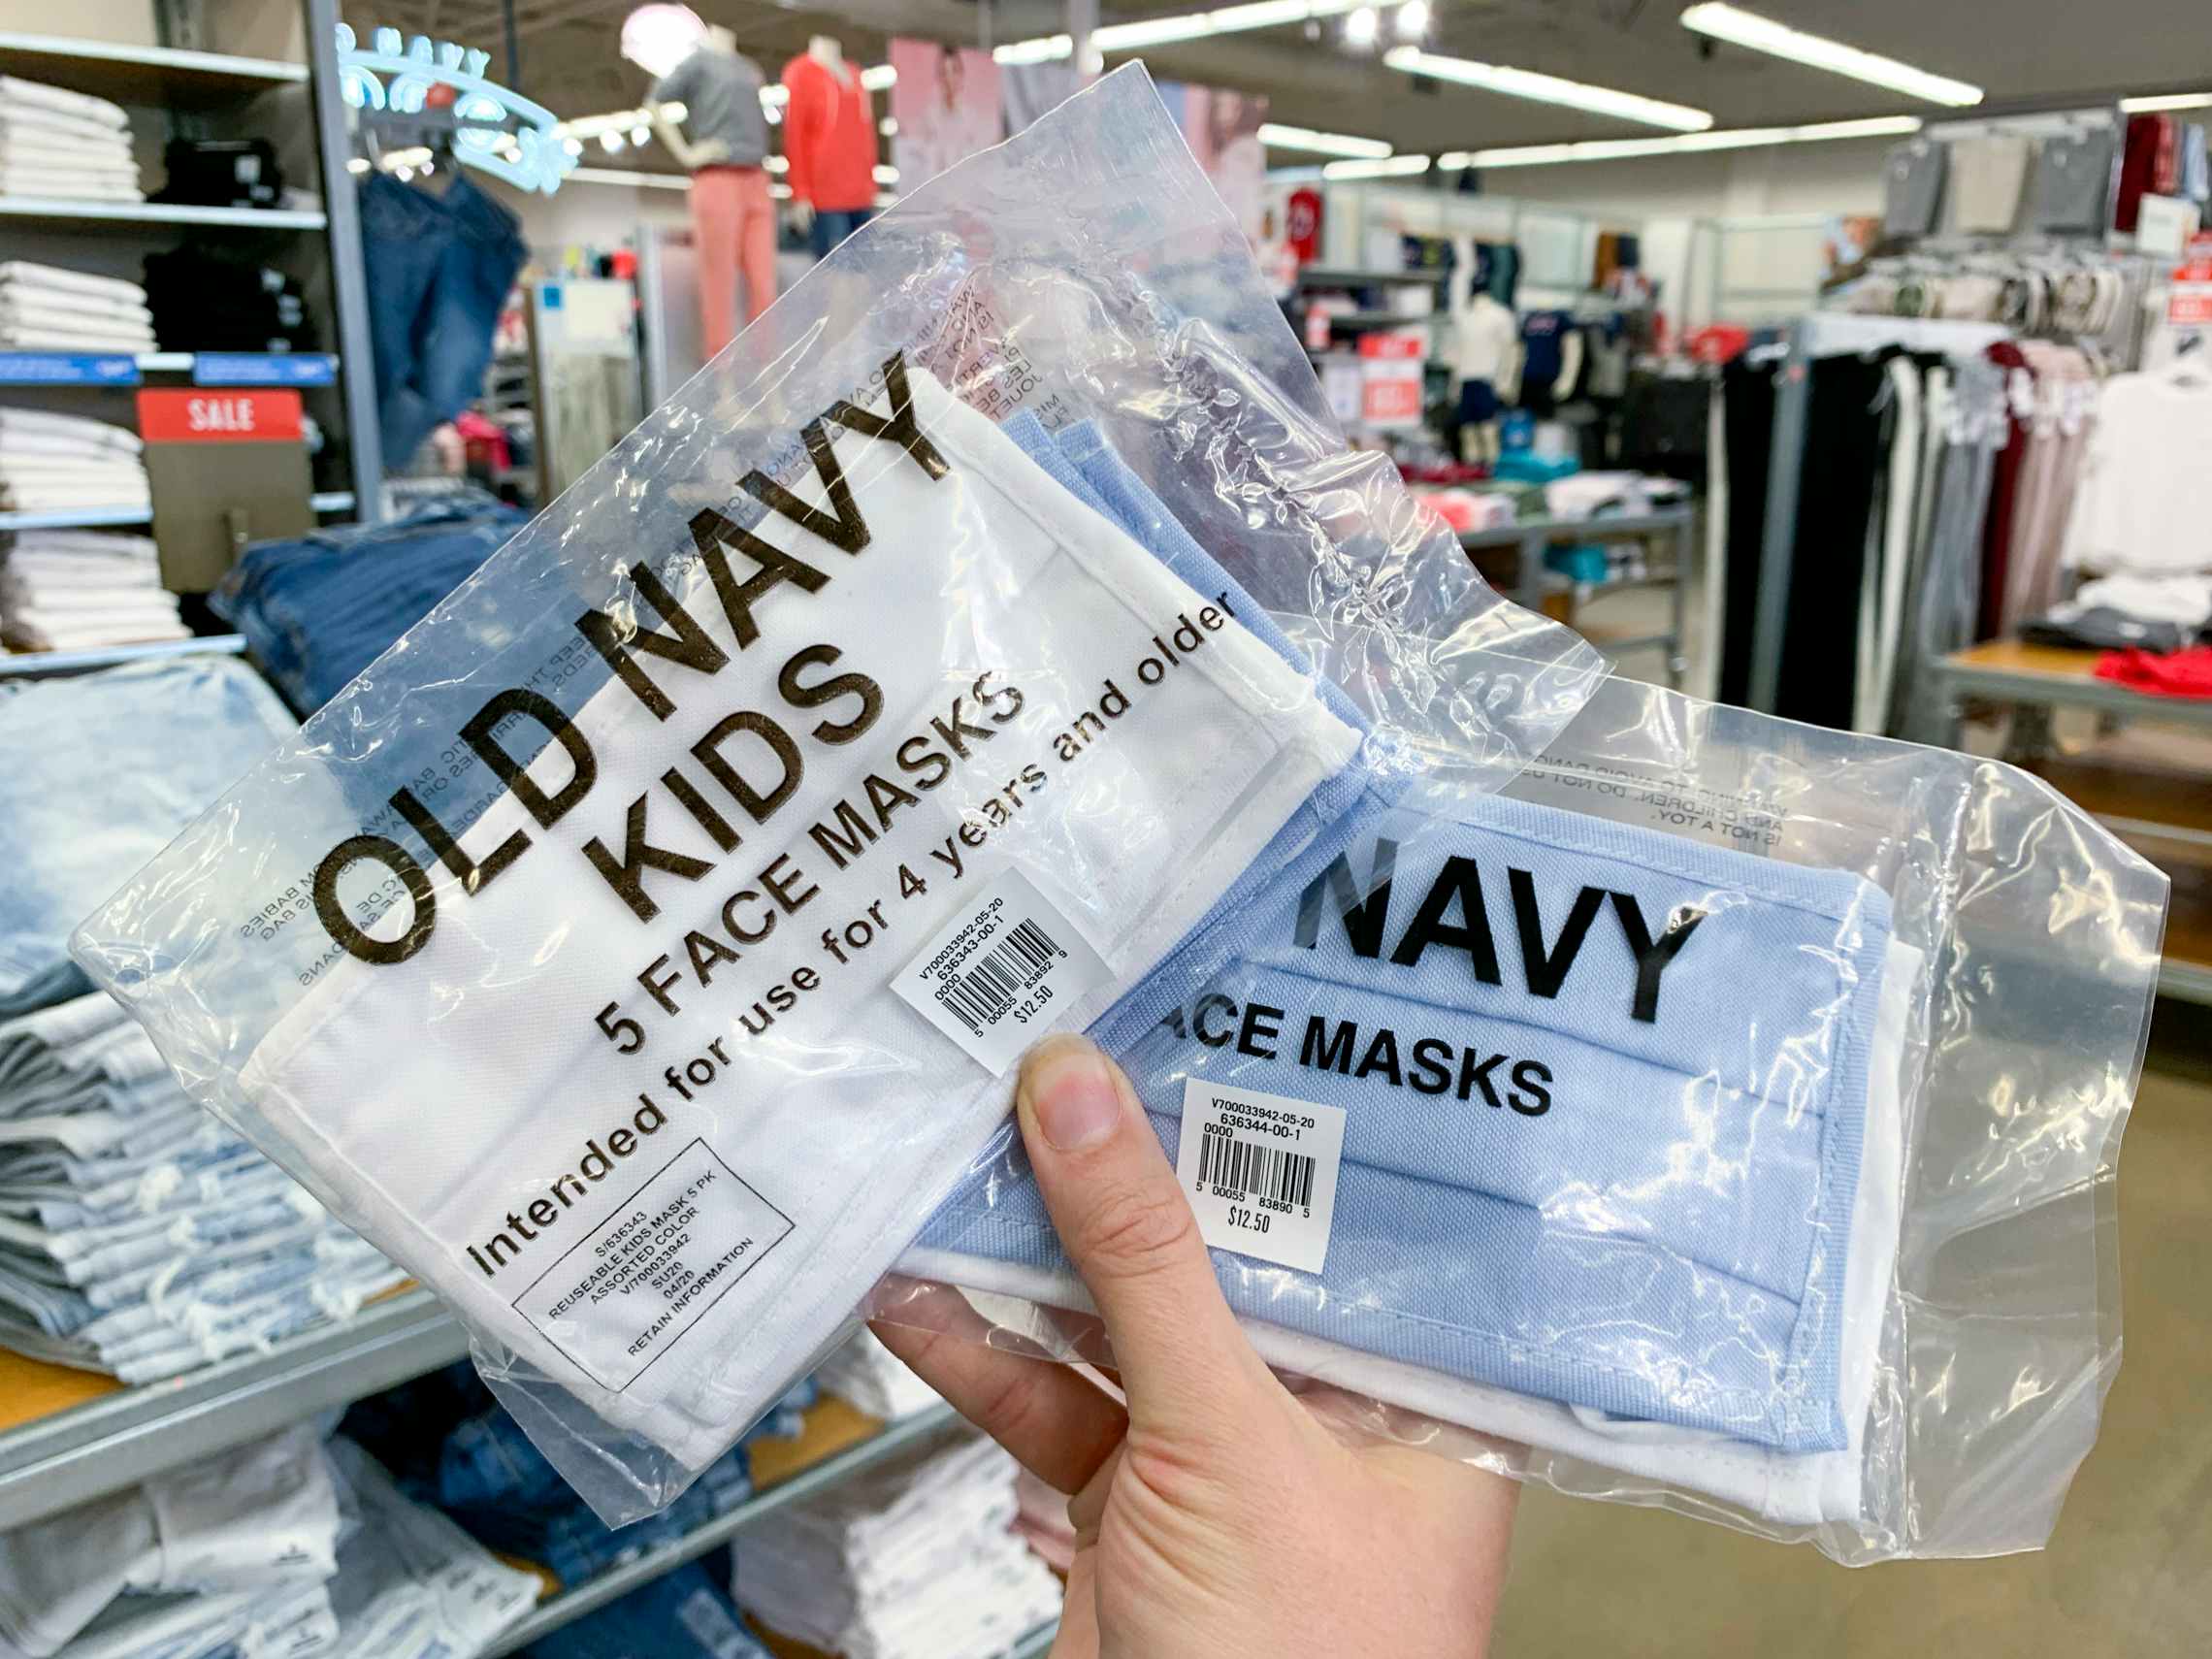 Old Navy fabric face masks in store.